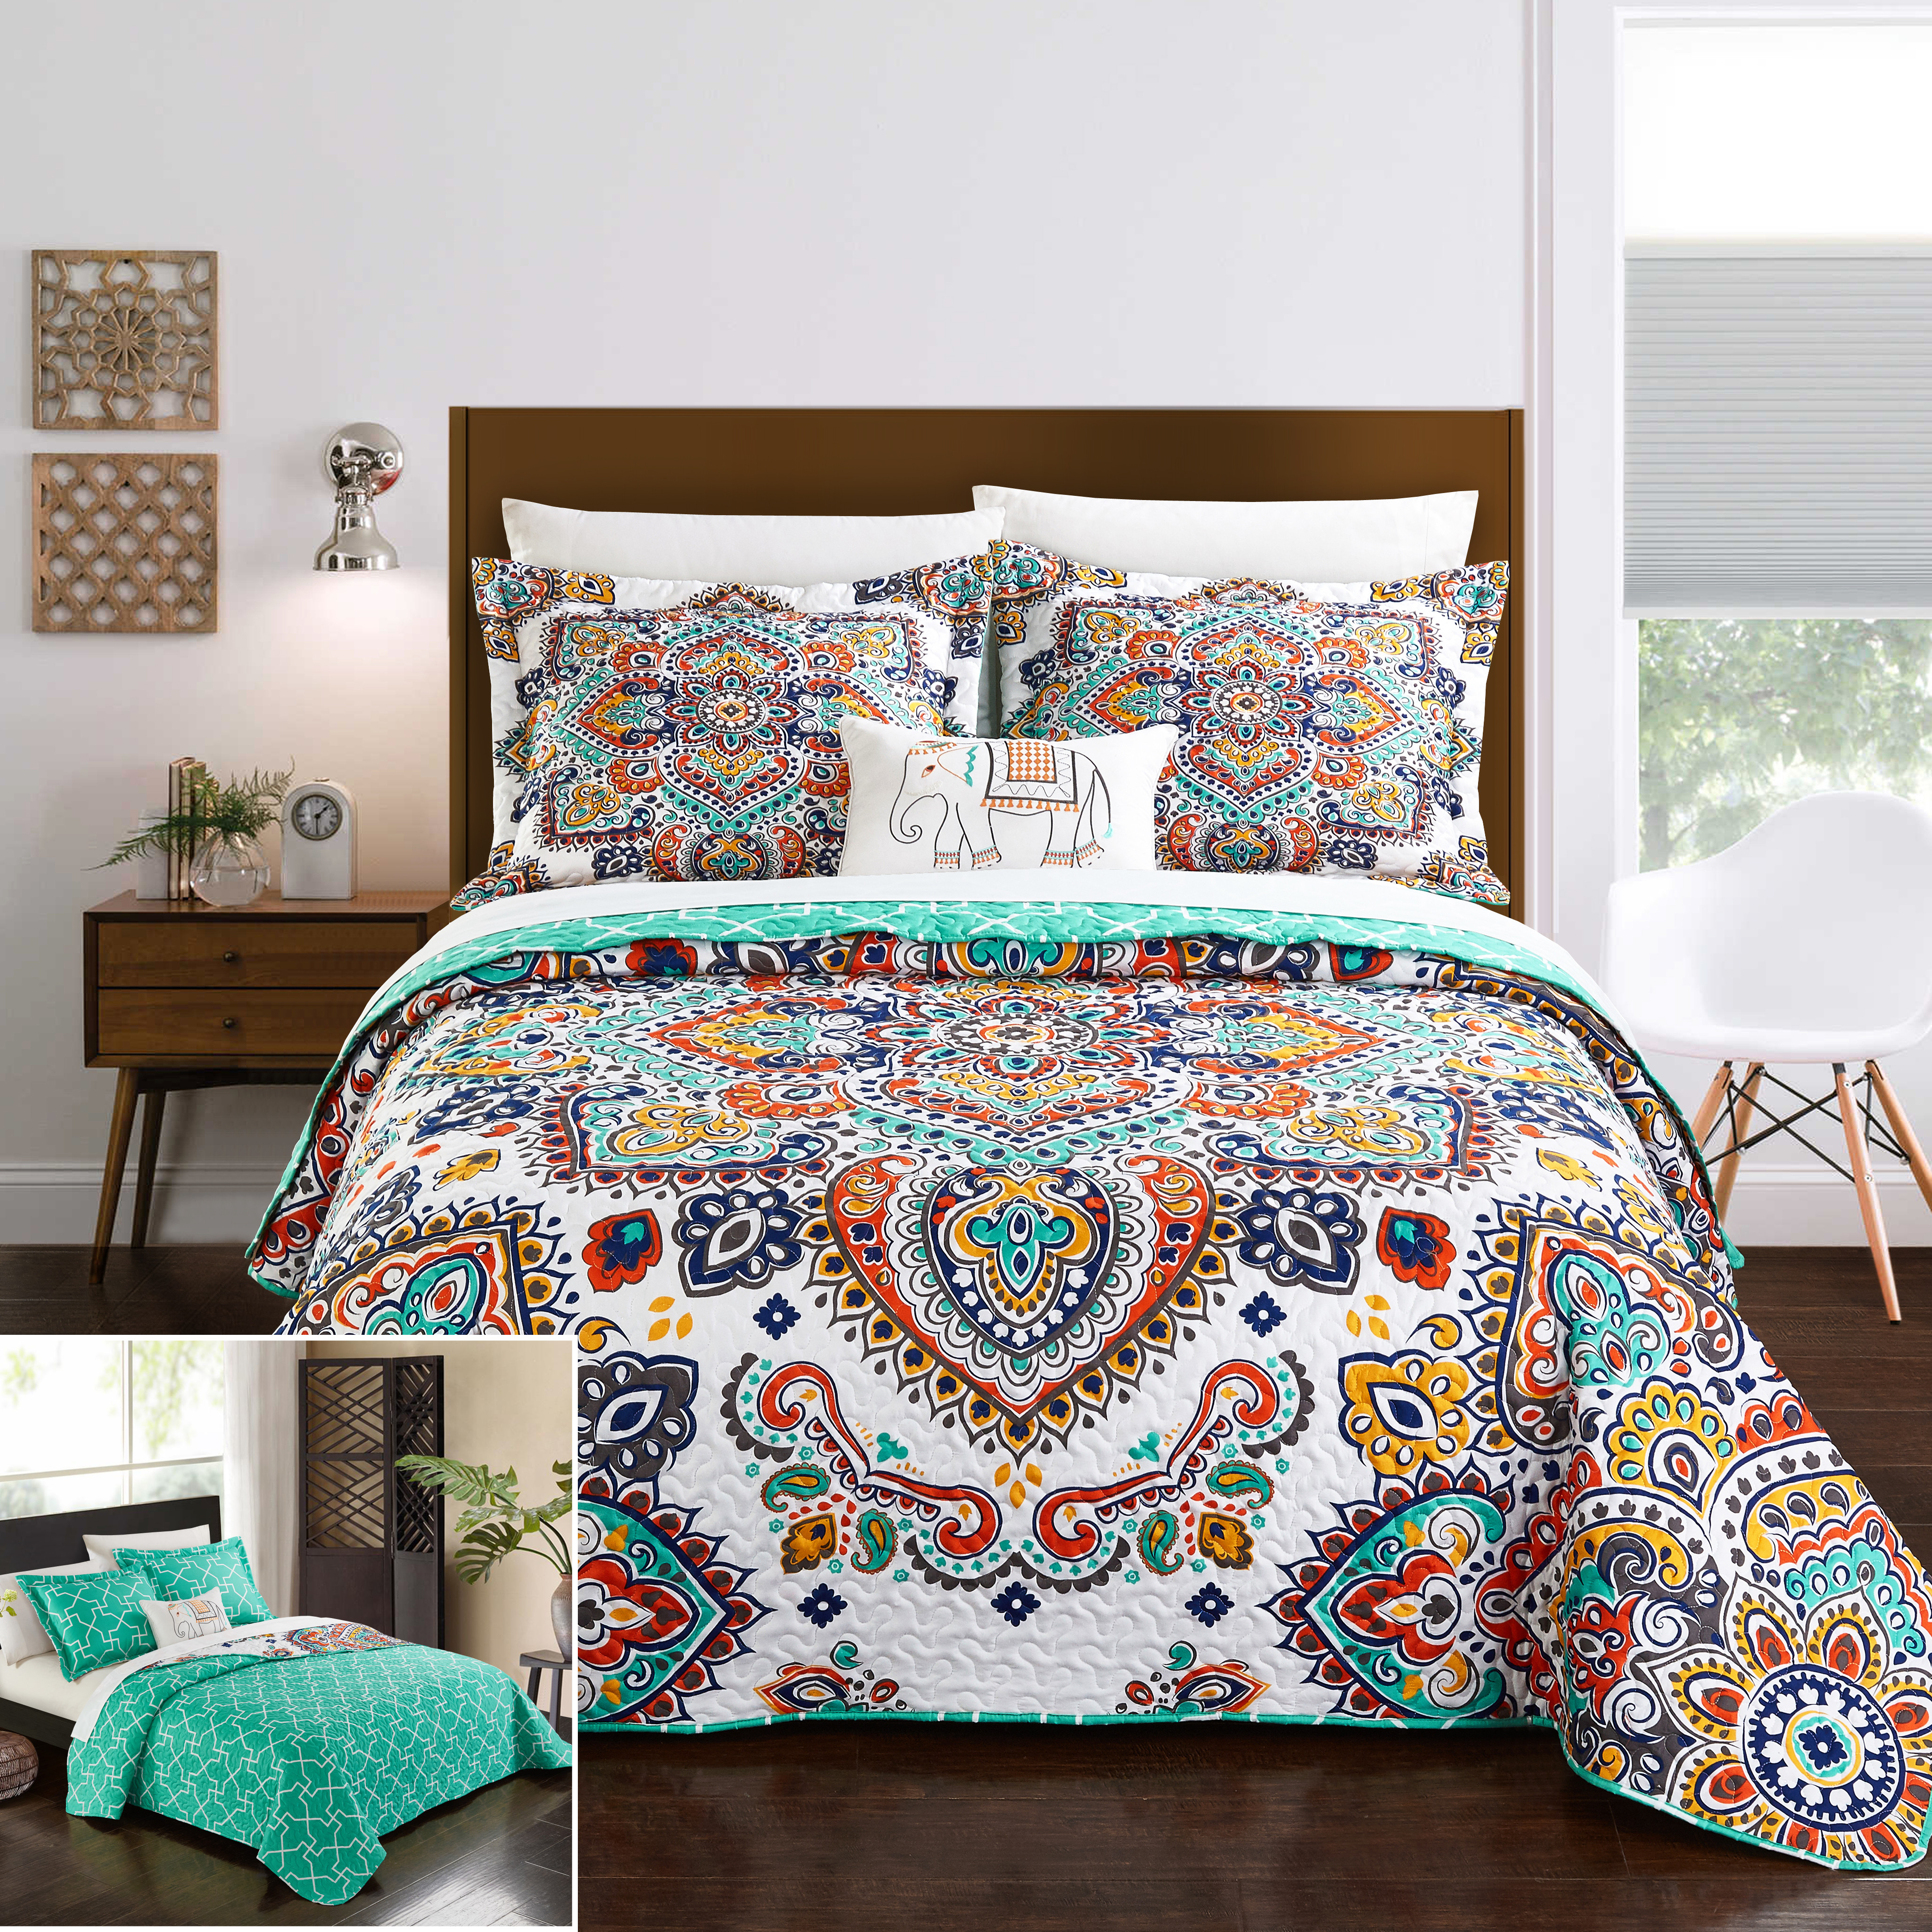 Chagir 3- Or 4-Piece Reversible Quilt Contemporary Bedding Set - Twin - 3 Piece